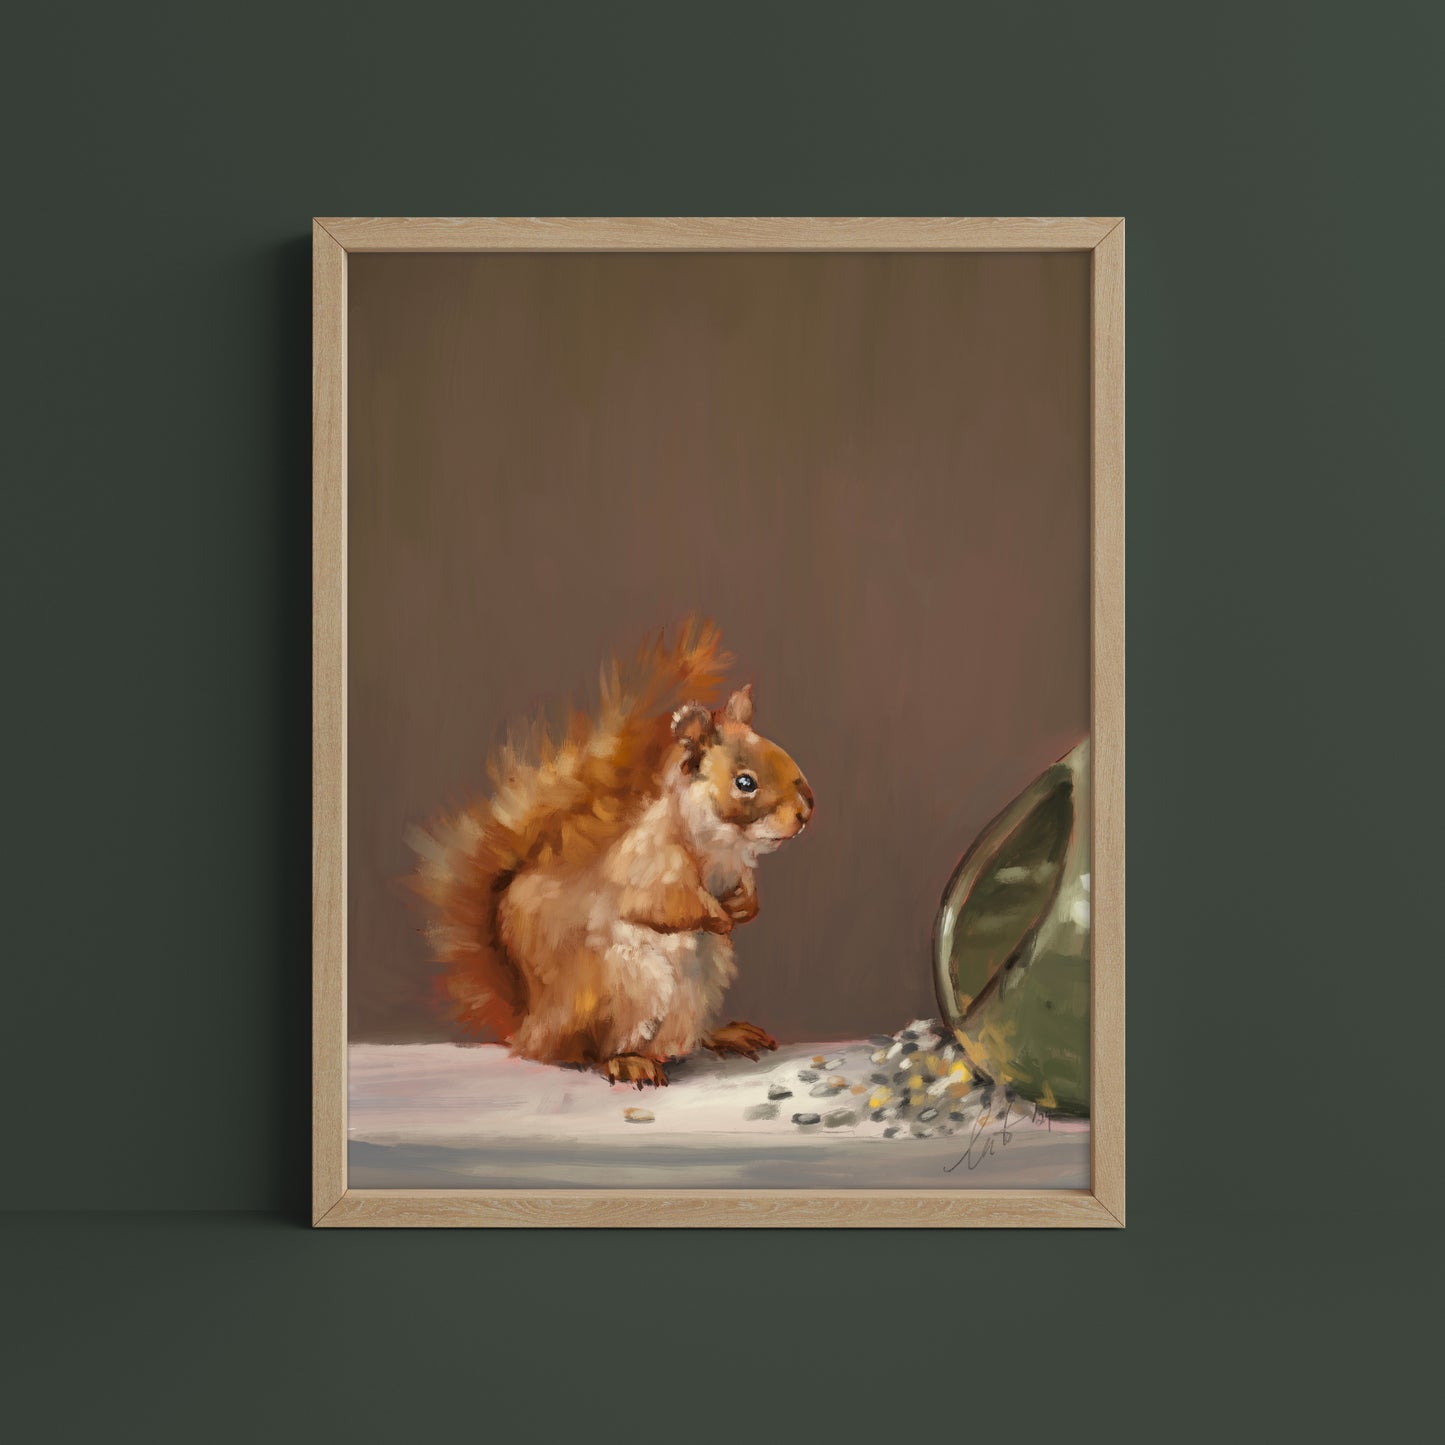 "Titi the Squirrel" by Catherine Hébert - Red Squirrel Oil Painting Giclée Art Print